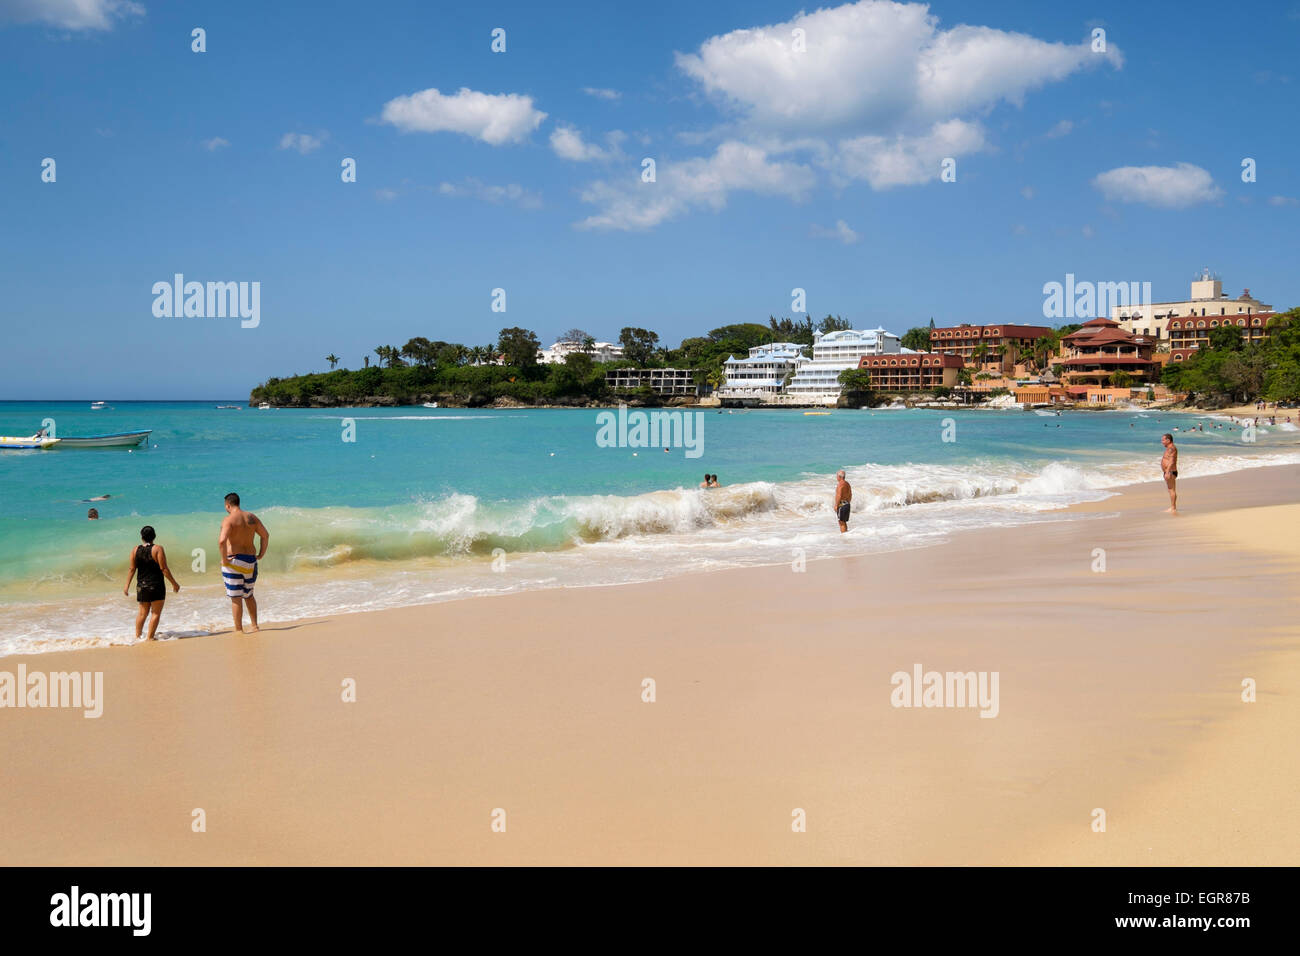 Tourists on a sandy beach on Atlantic ocean in holiday resort of Sosua, Dominican Republic, Caribbean Islands Stock Photo